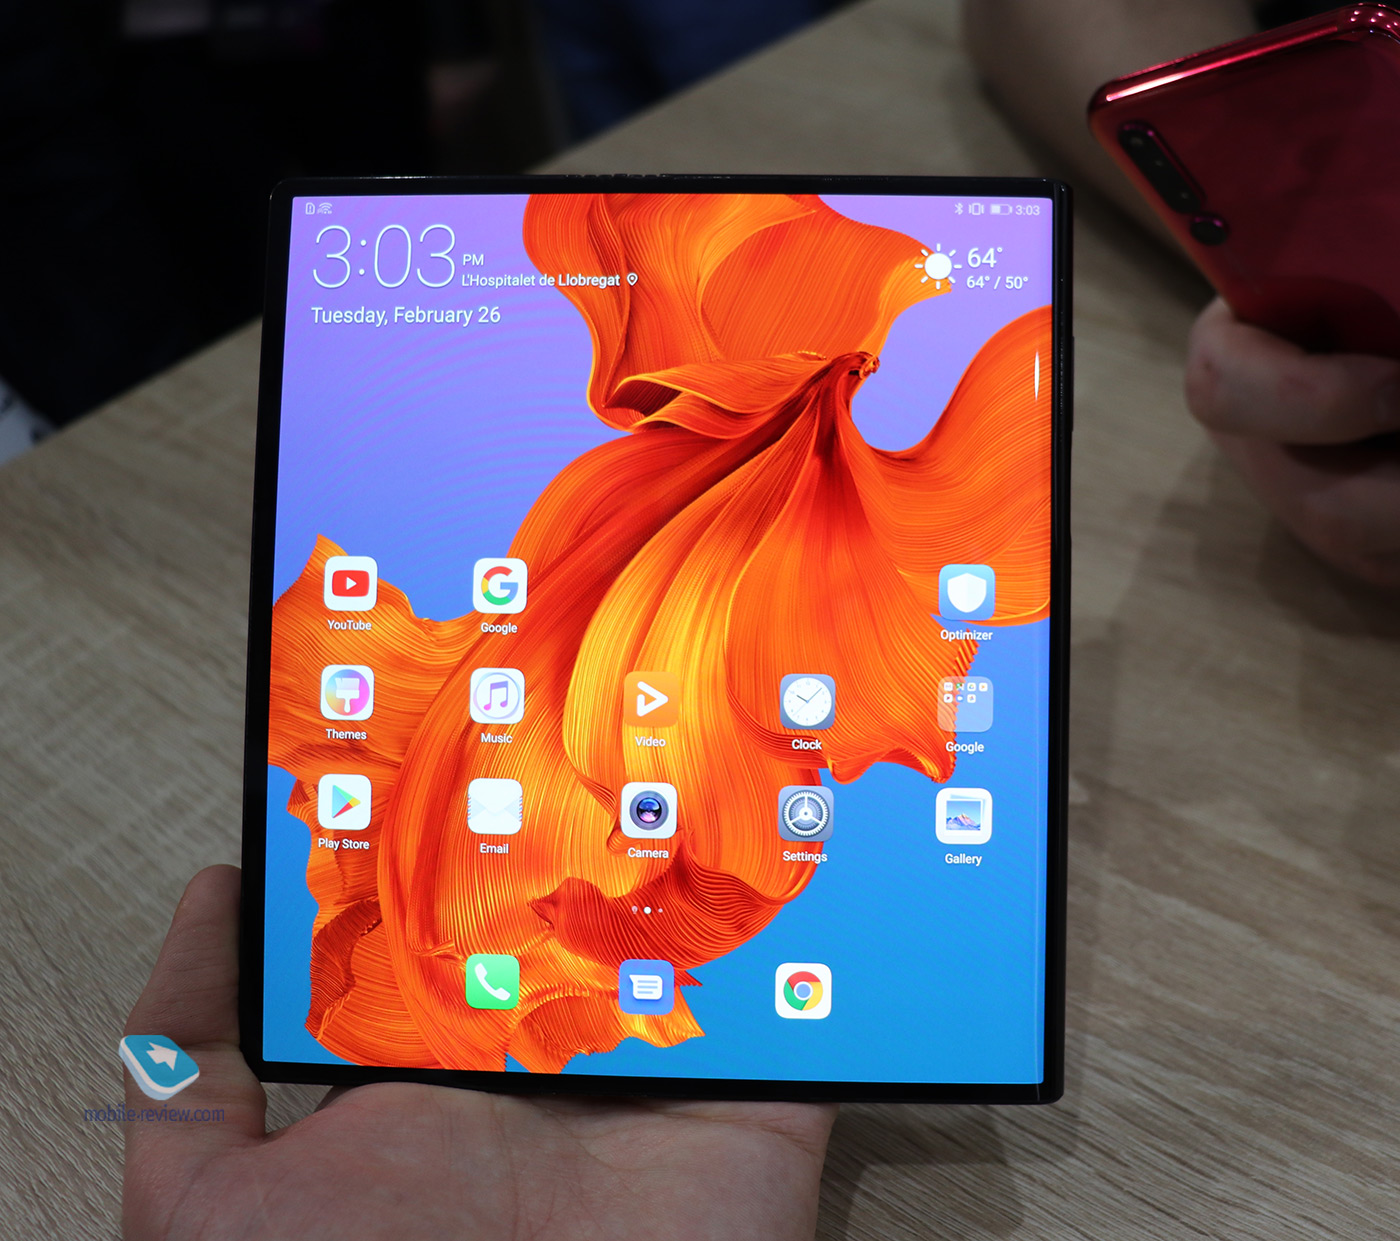 Flagships with flexible screens, the coming of the Galaxy Z Fold2 clones